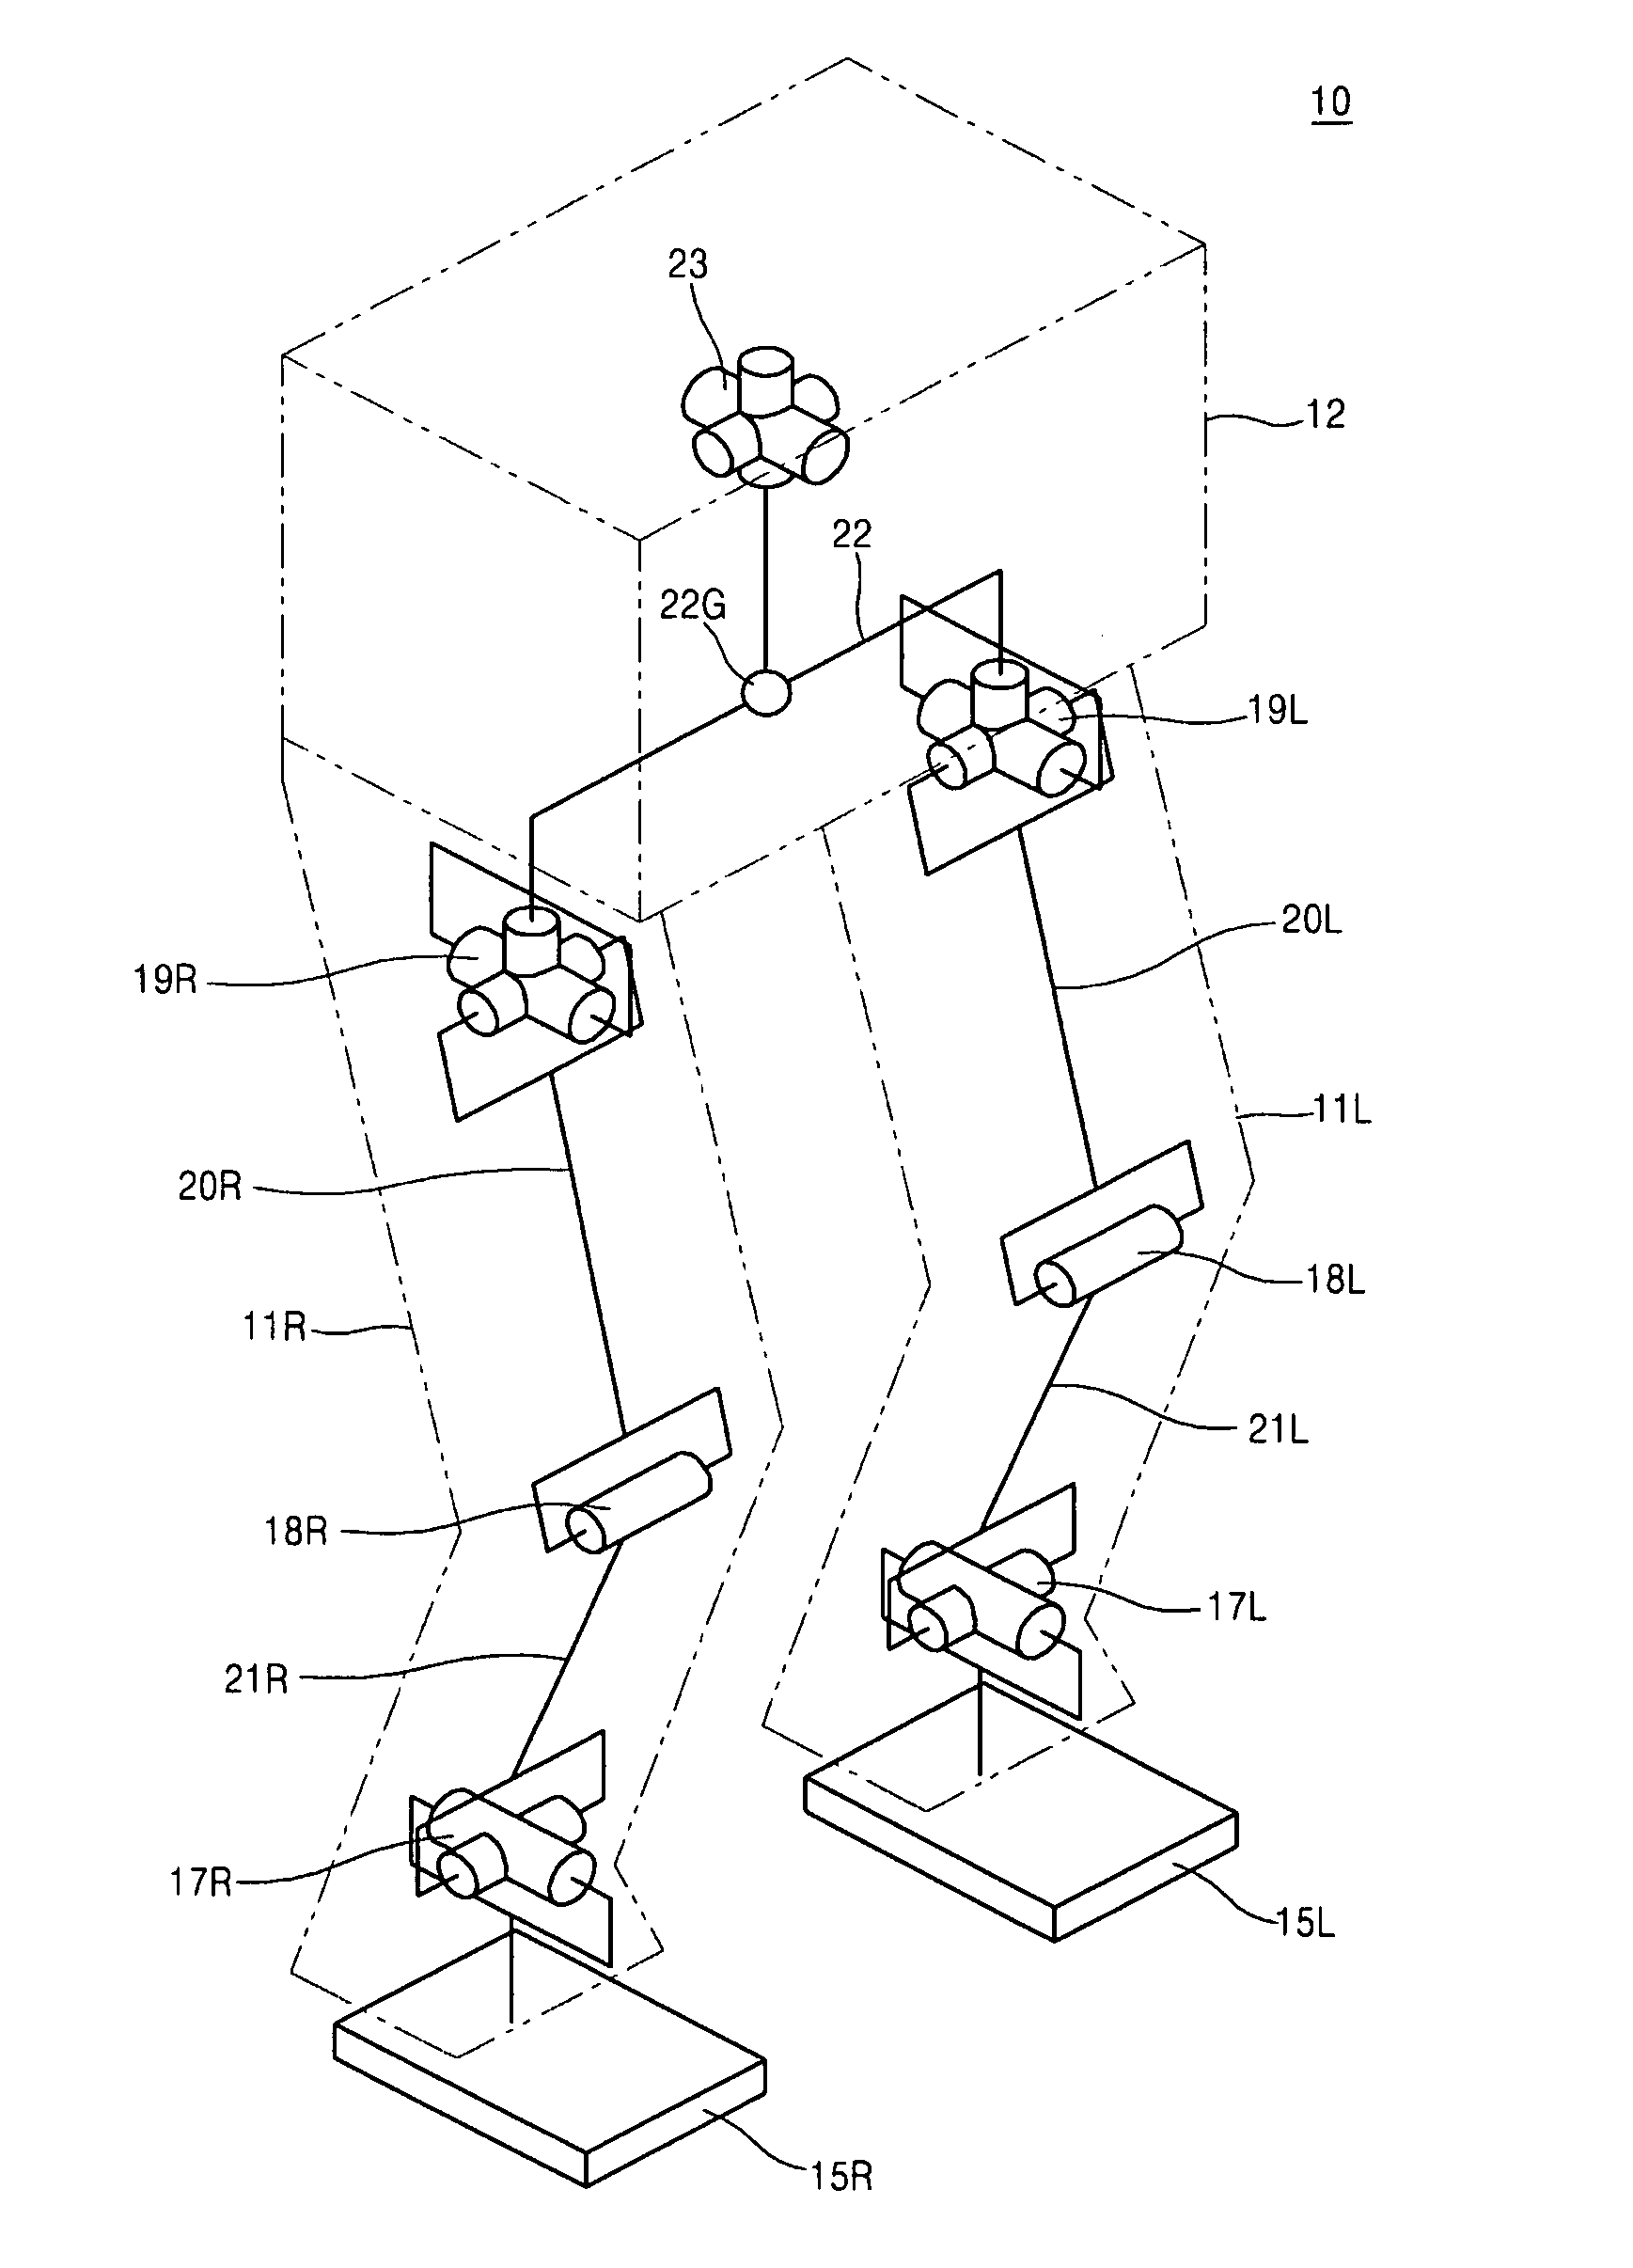 Robot and method of controlling the same